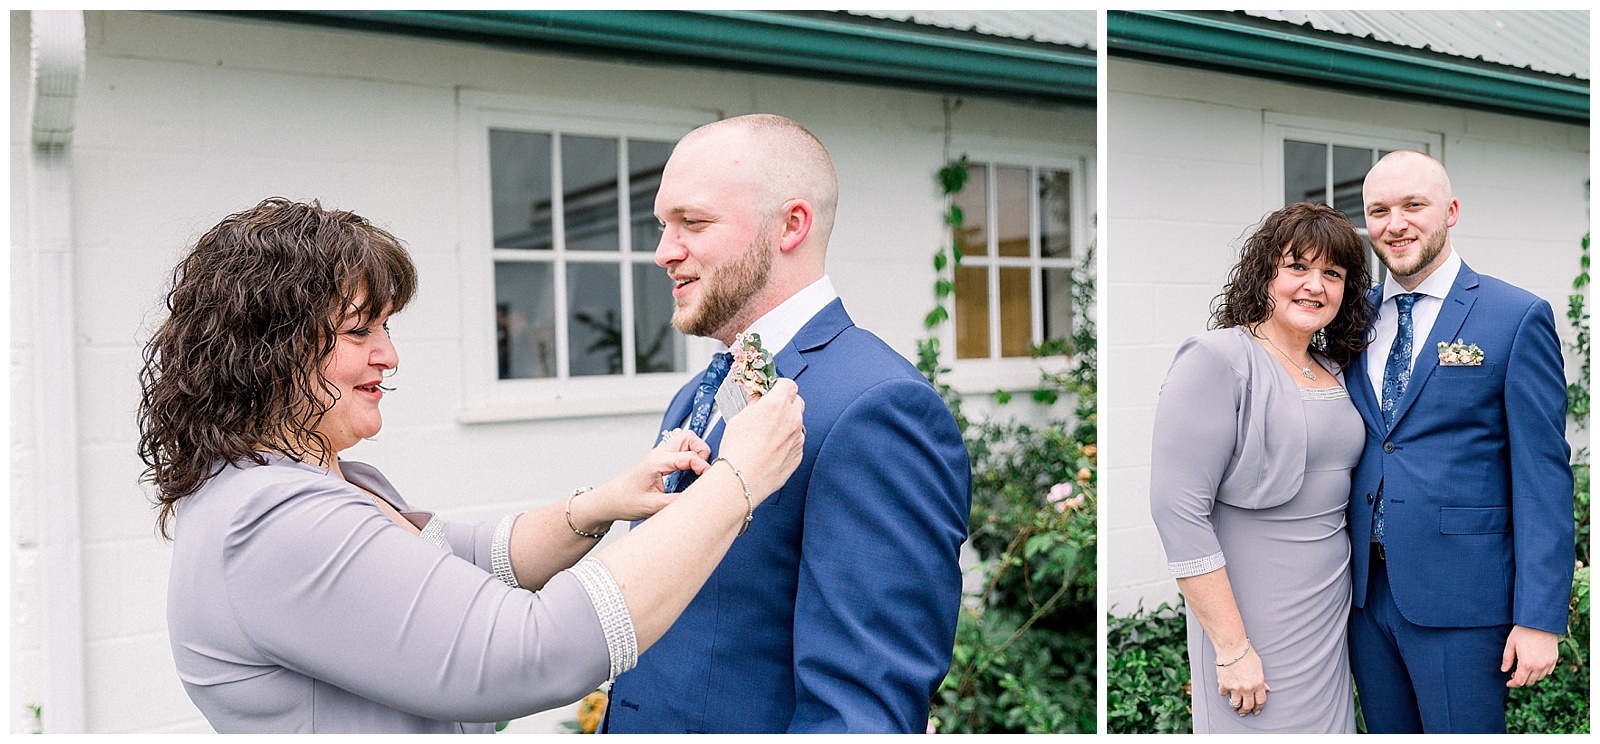 mother of the groom pins on his boutonniere at lakefield weddings, a modern barn wedding venue